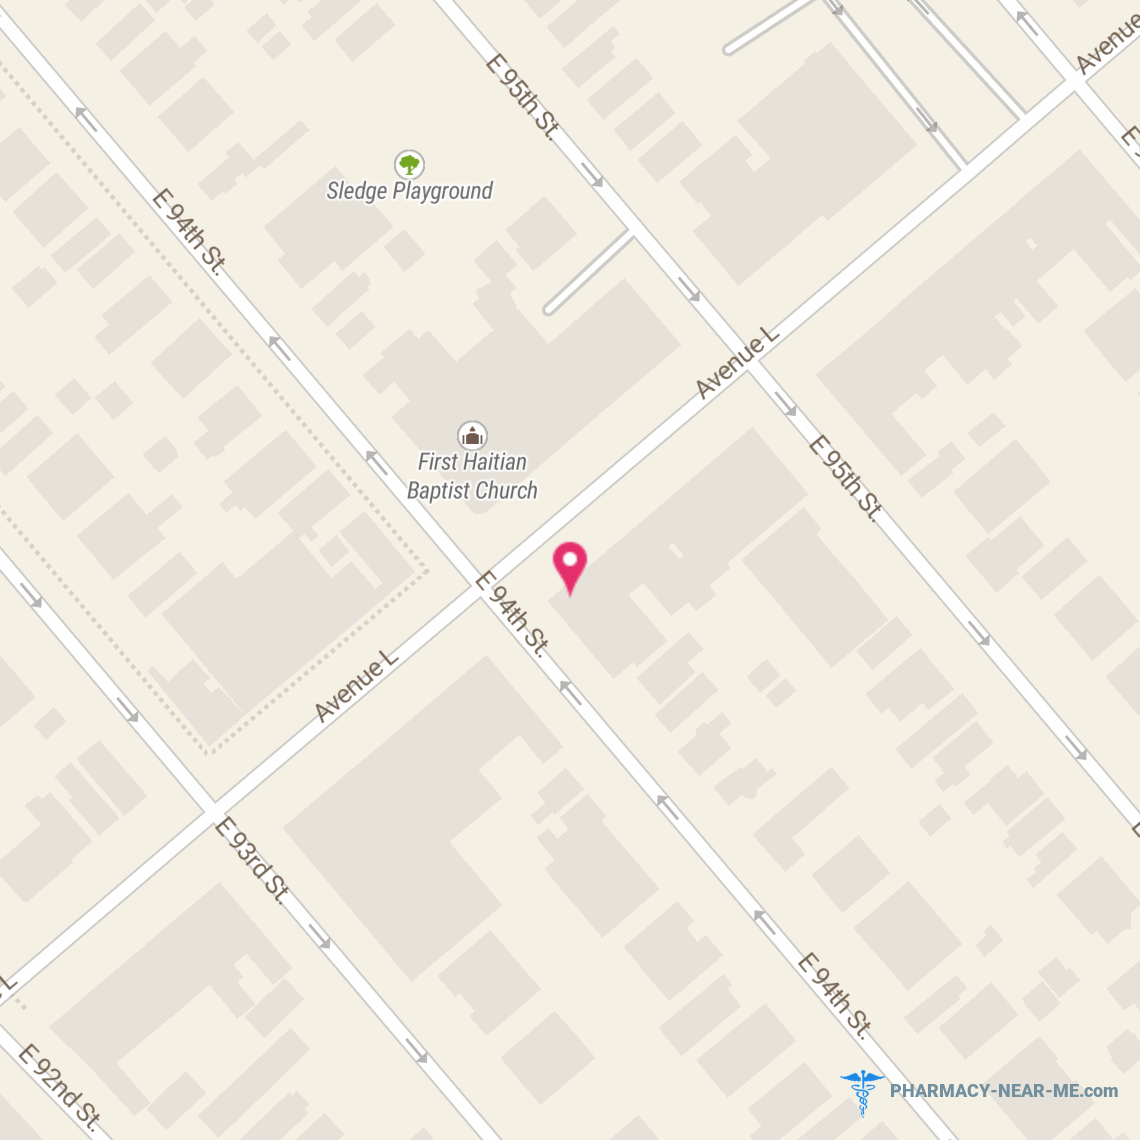 MARTYS PHARMACY - Pharmacy Hours, Phone, Reviews & Information: 9422 Avenue L, Brooklyn, New York 11236, United States